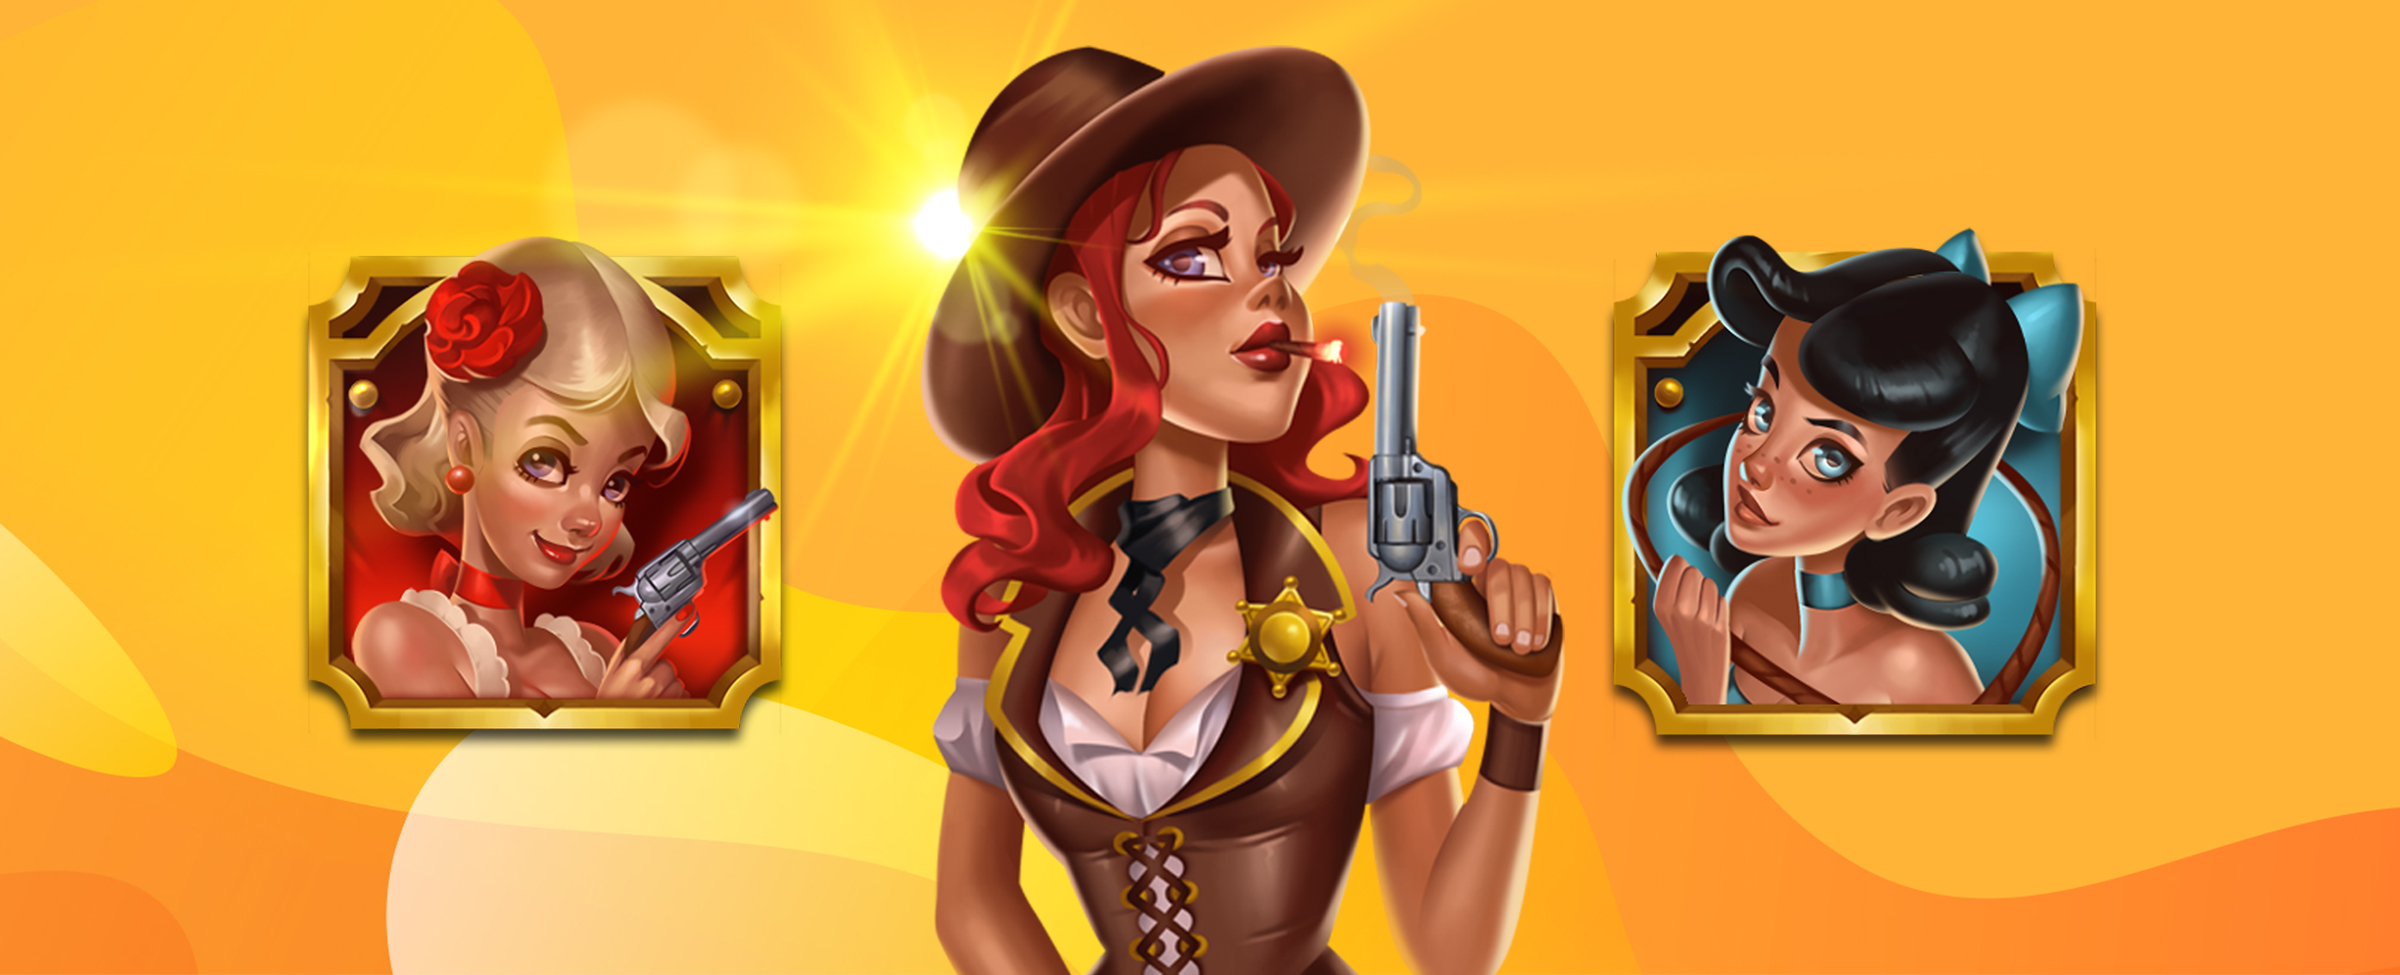 Central character from the Lawless Ladies slot game at SlotsLV stands between two accompanying character symbols from the same game